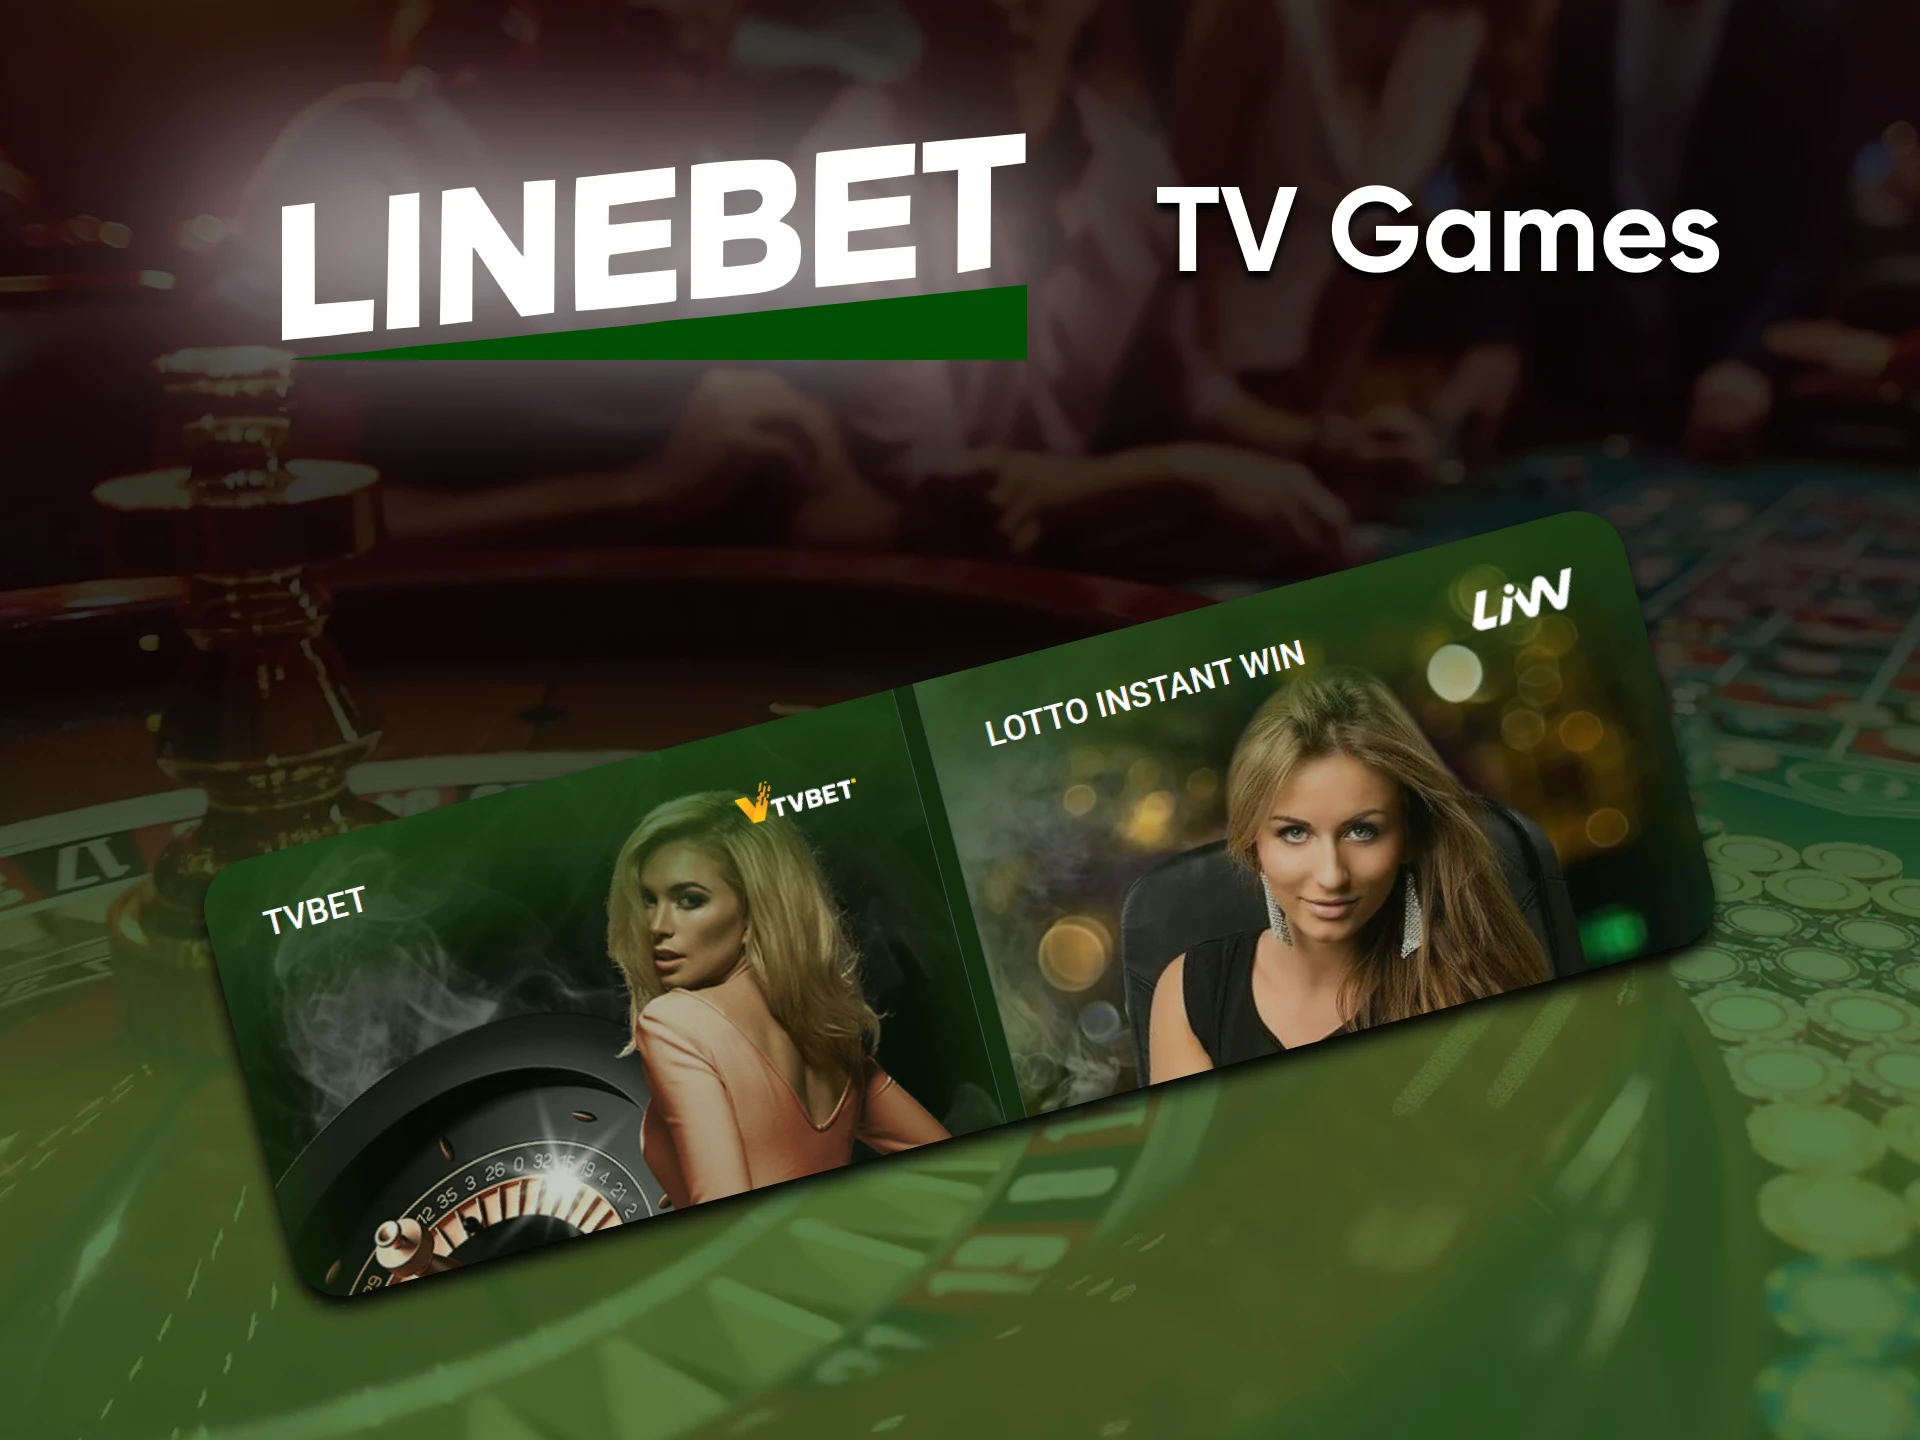 At Linebet casino you can play TV Games.